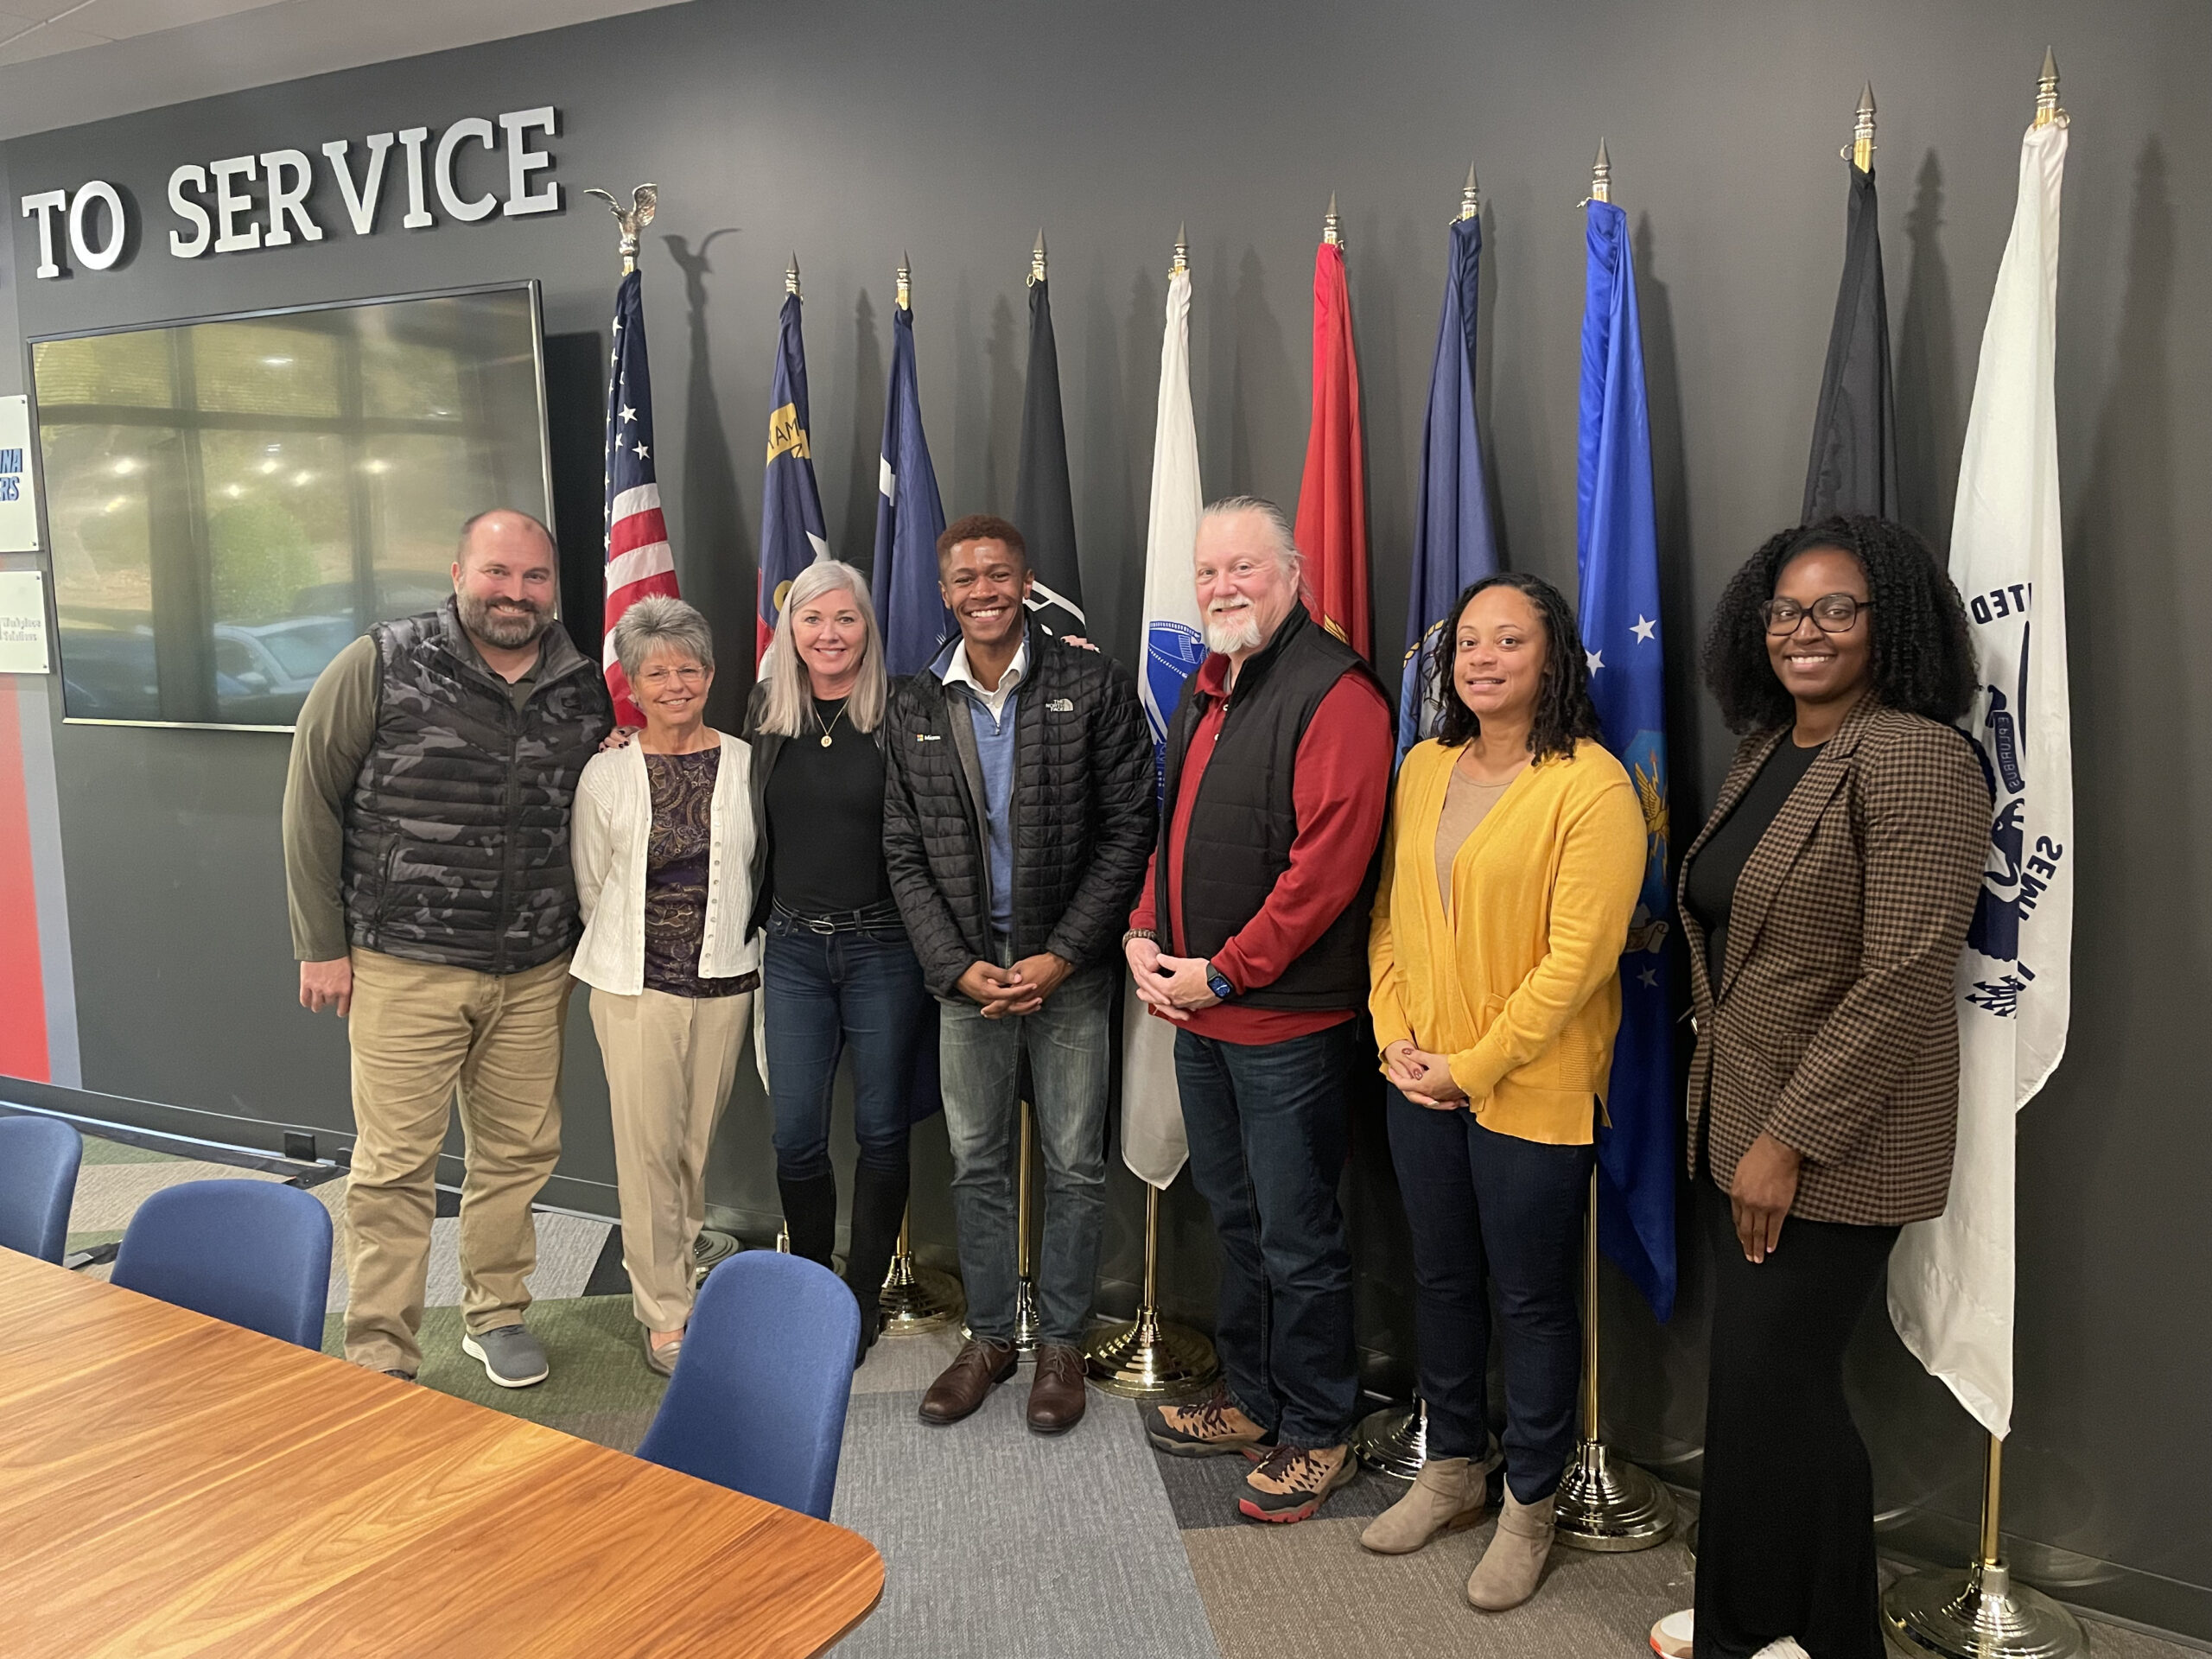 JJ Townsend is joined by Chemere Davis to visit Veteran's Bridge Home, where they shared Microsoft insights and discussed Apparo's impact on the organization's ability to connect veterans to the community.